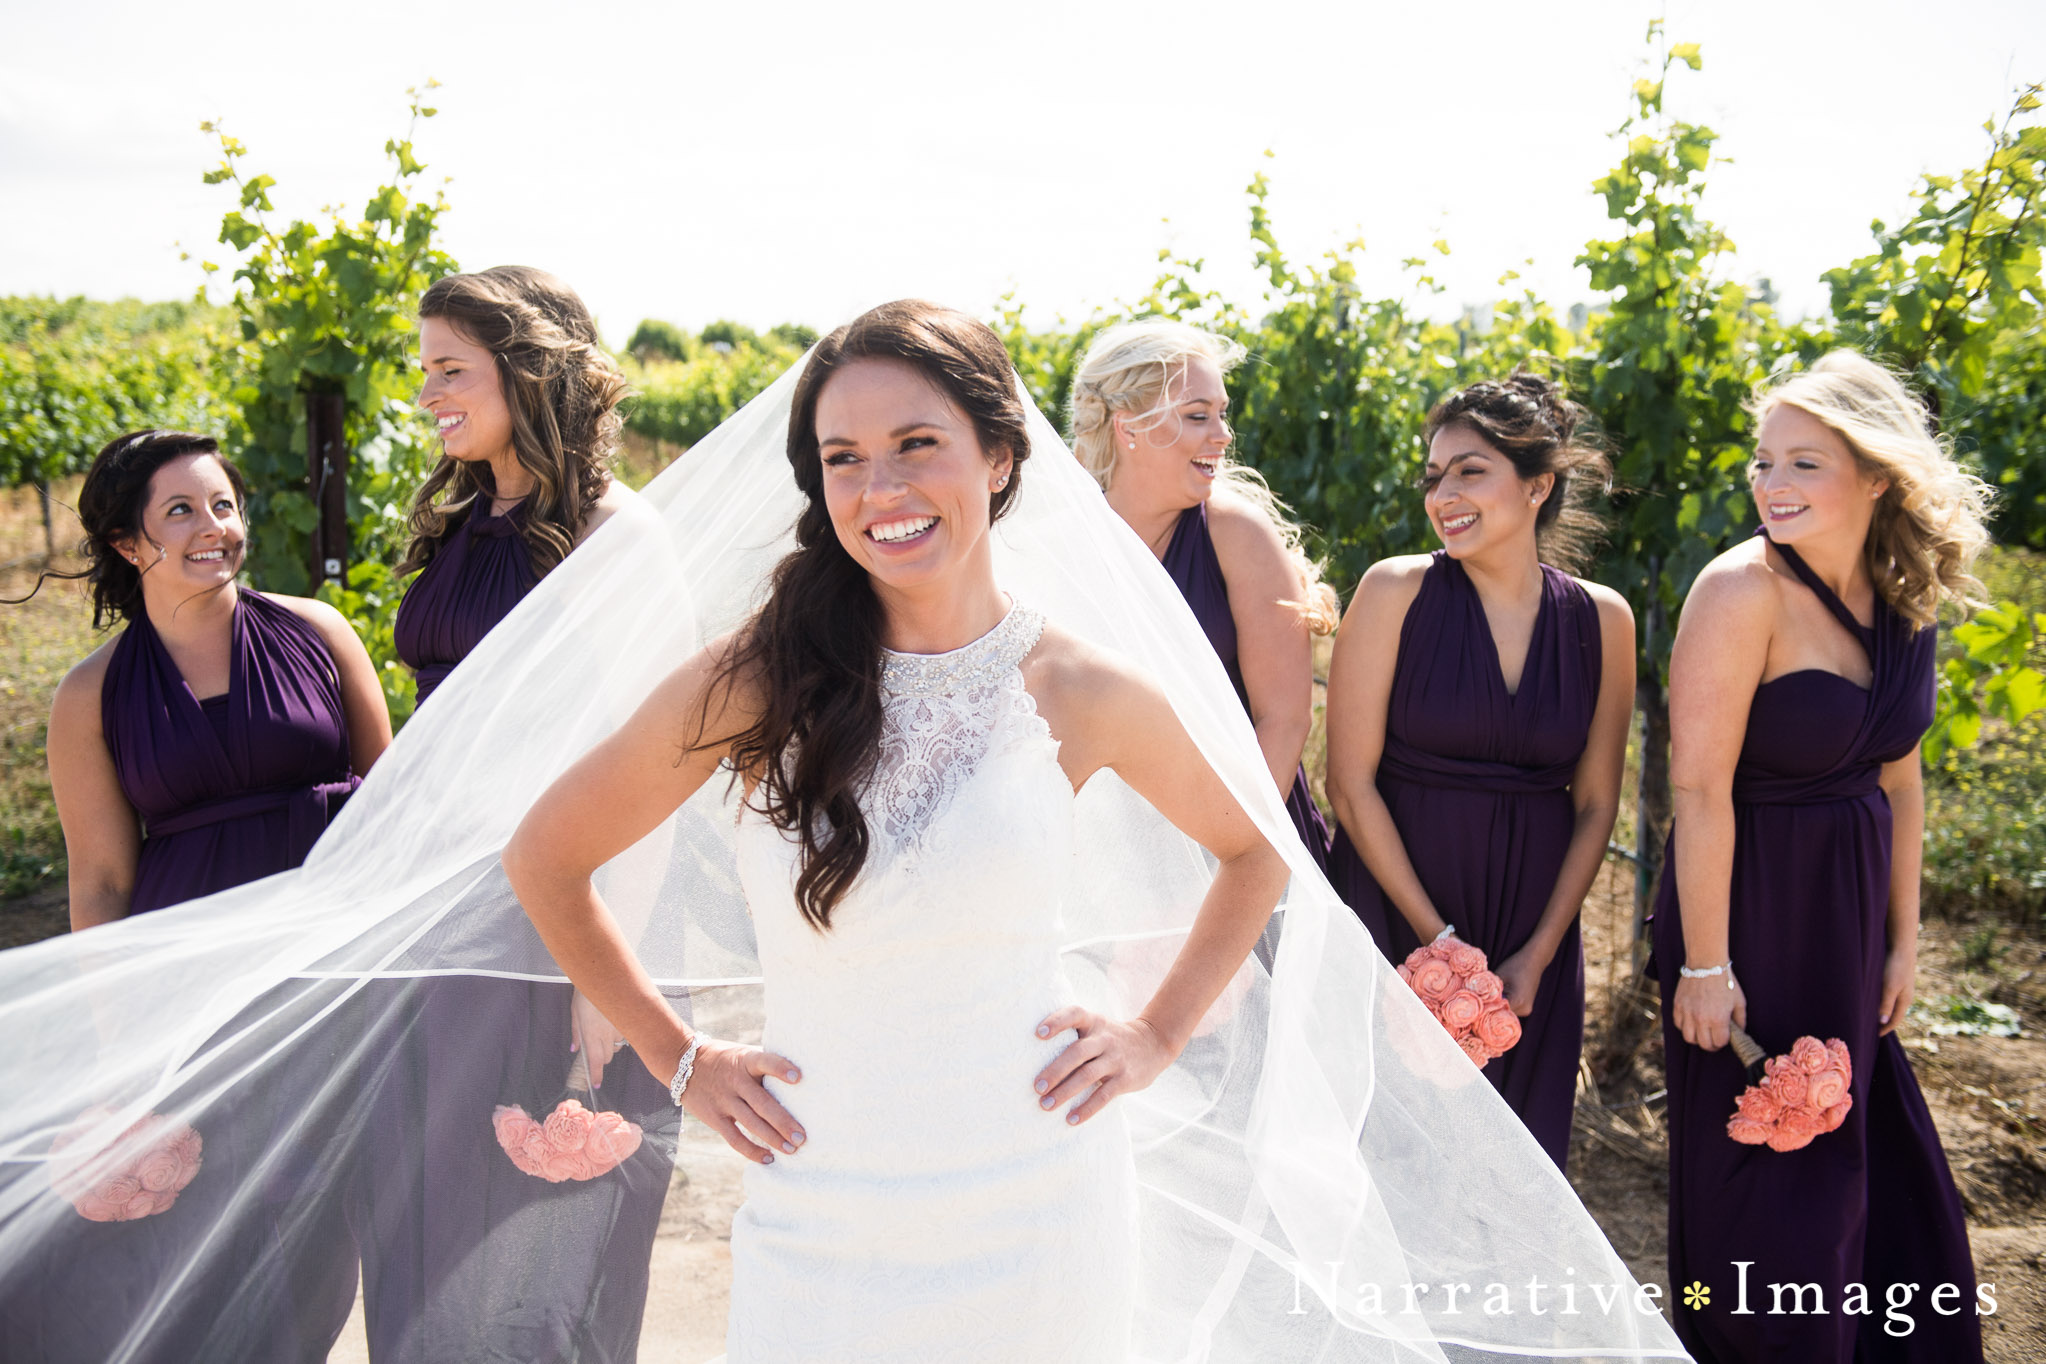 Candid Photojournalistic portrait of bride with bridesmaids in vineyard at mt. palomar winery